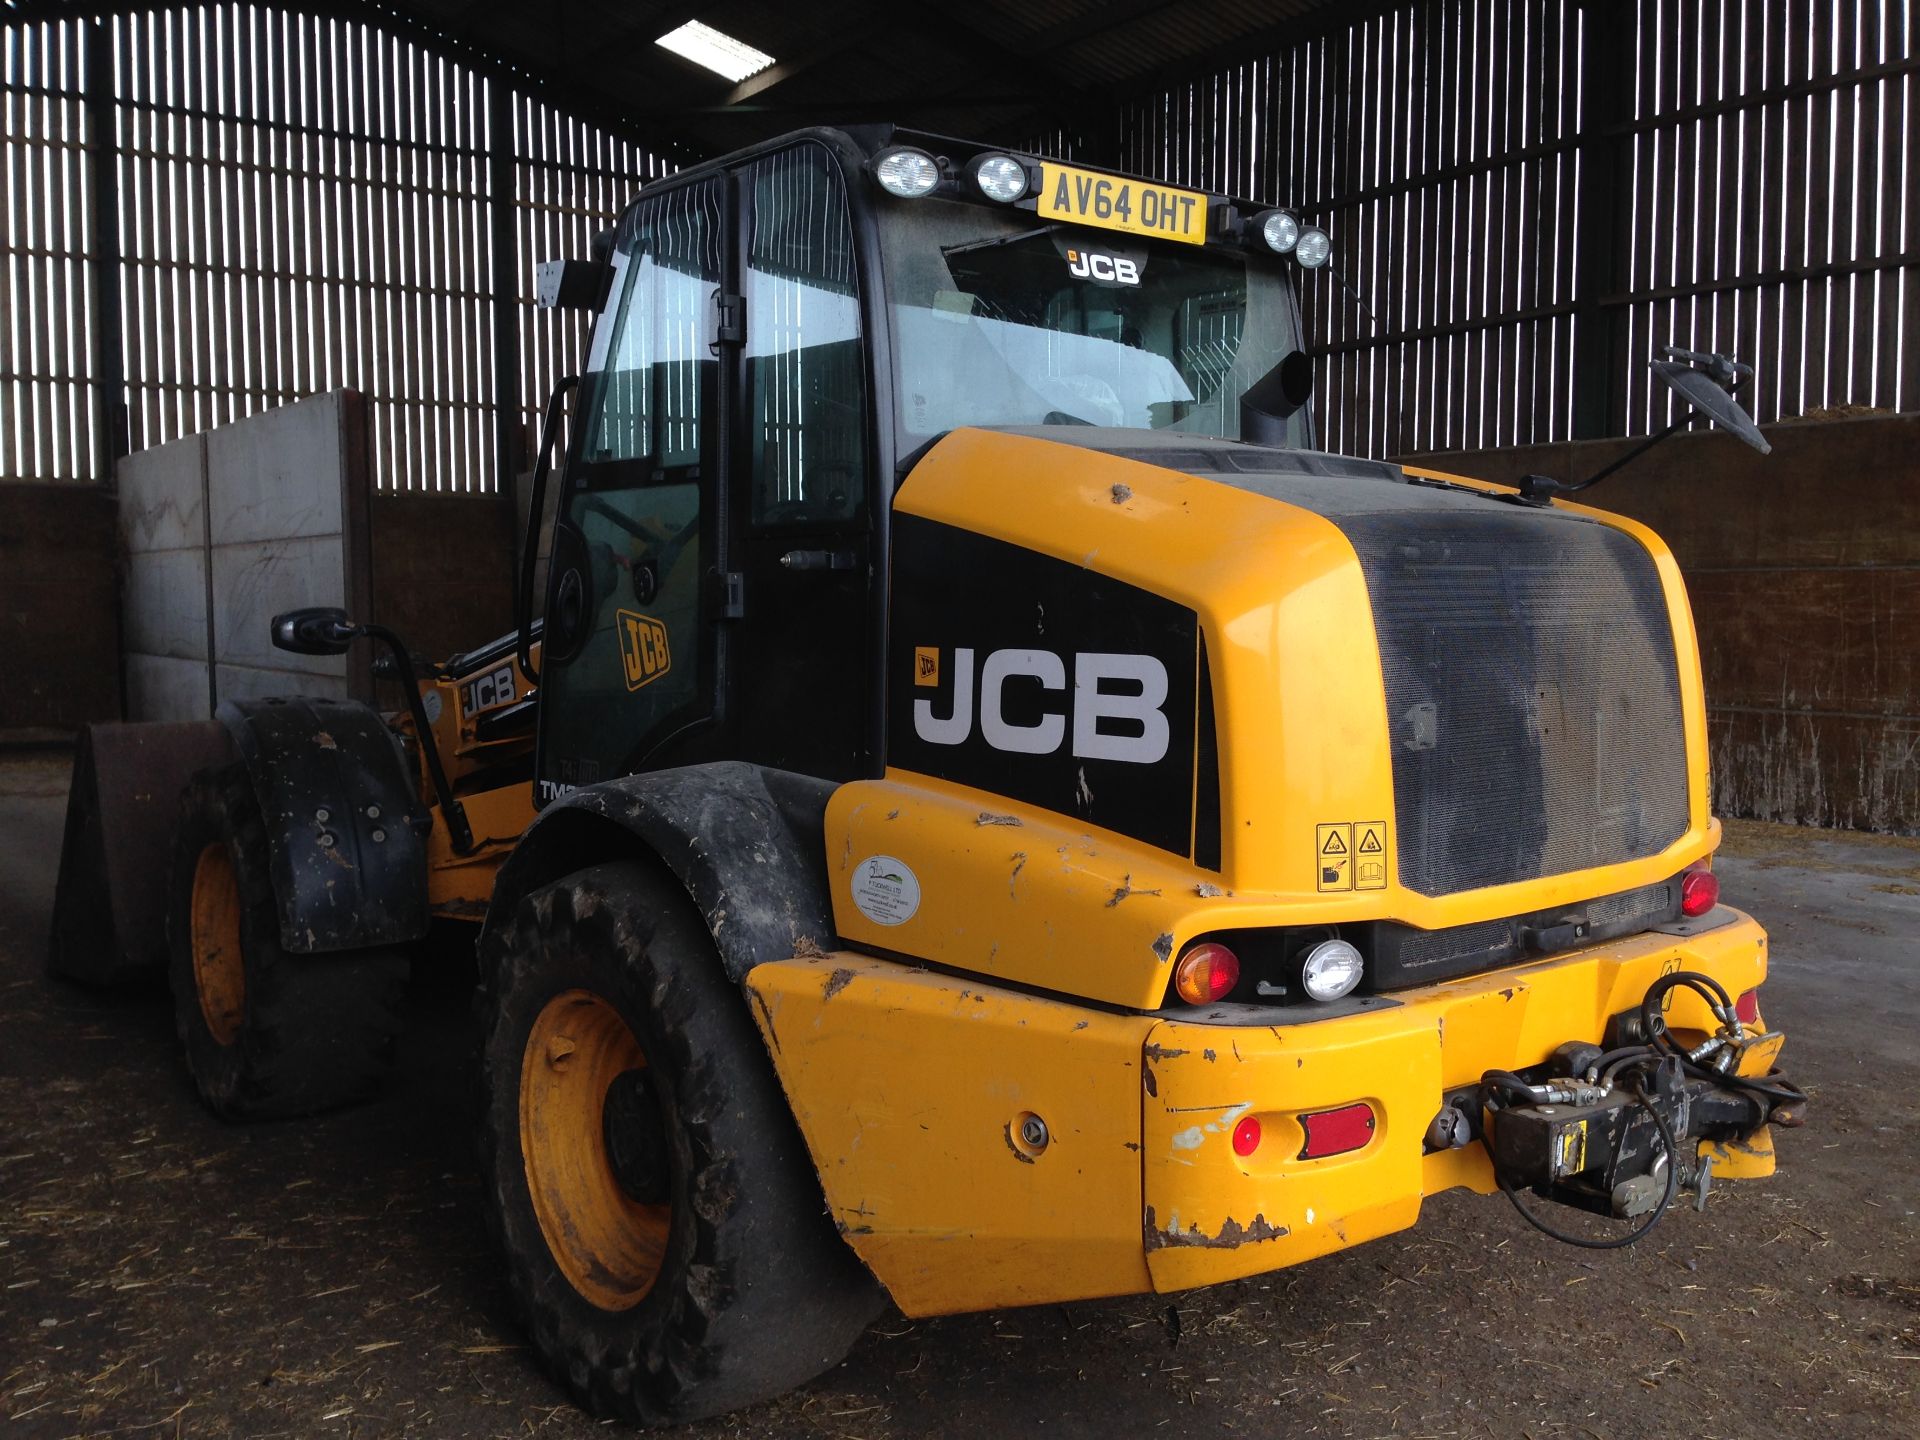 JCB TM320 Agri T4i iiiB, Articulated Loader, Auto Hitch, PUH, Location Diss, Norfolk. - Image 5 of 10